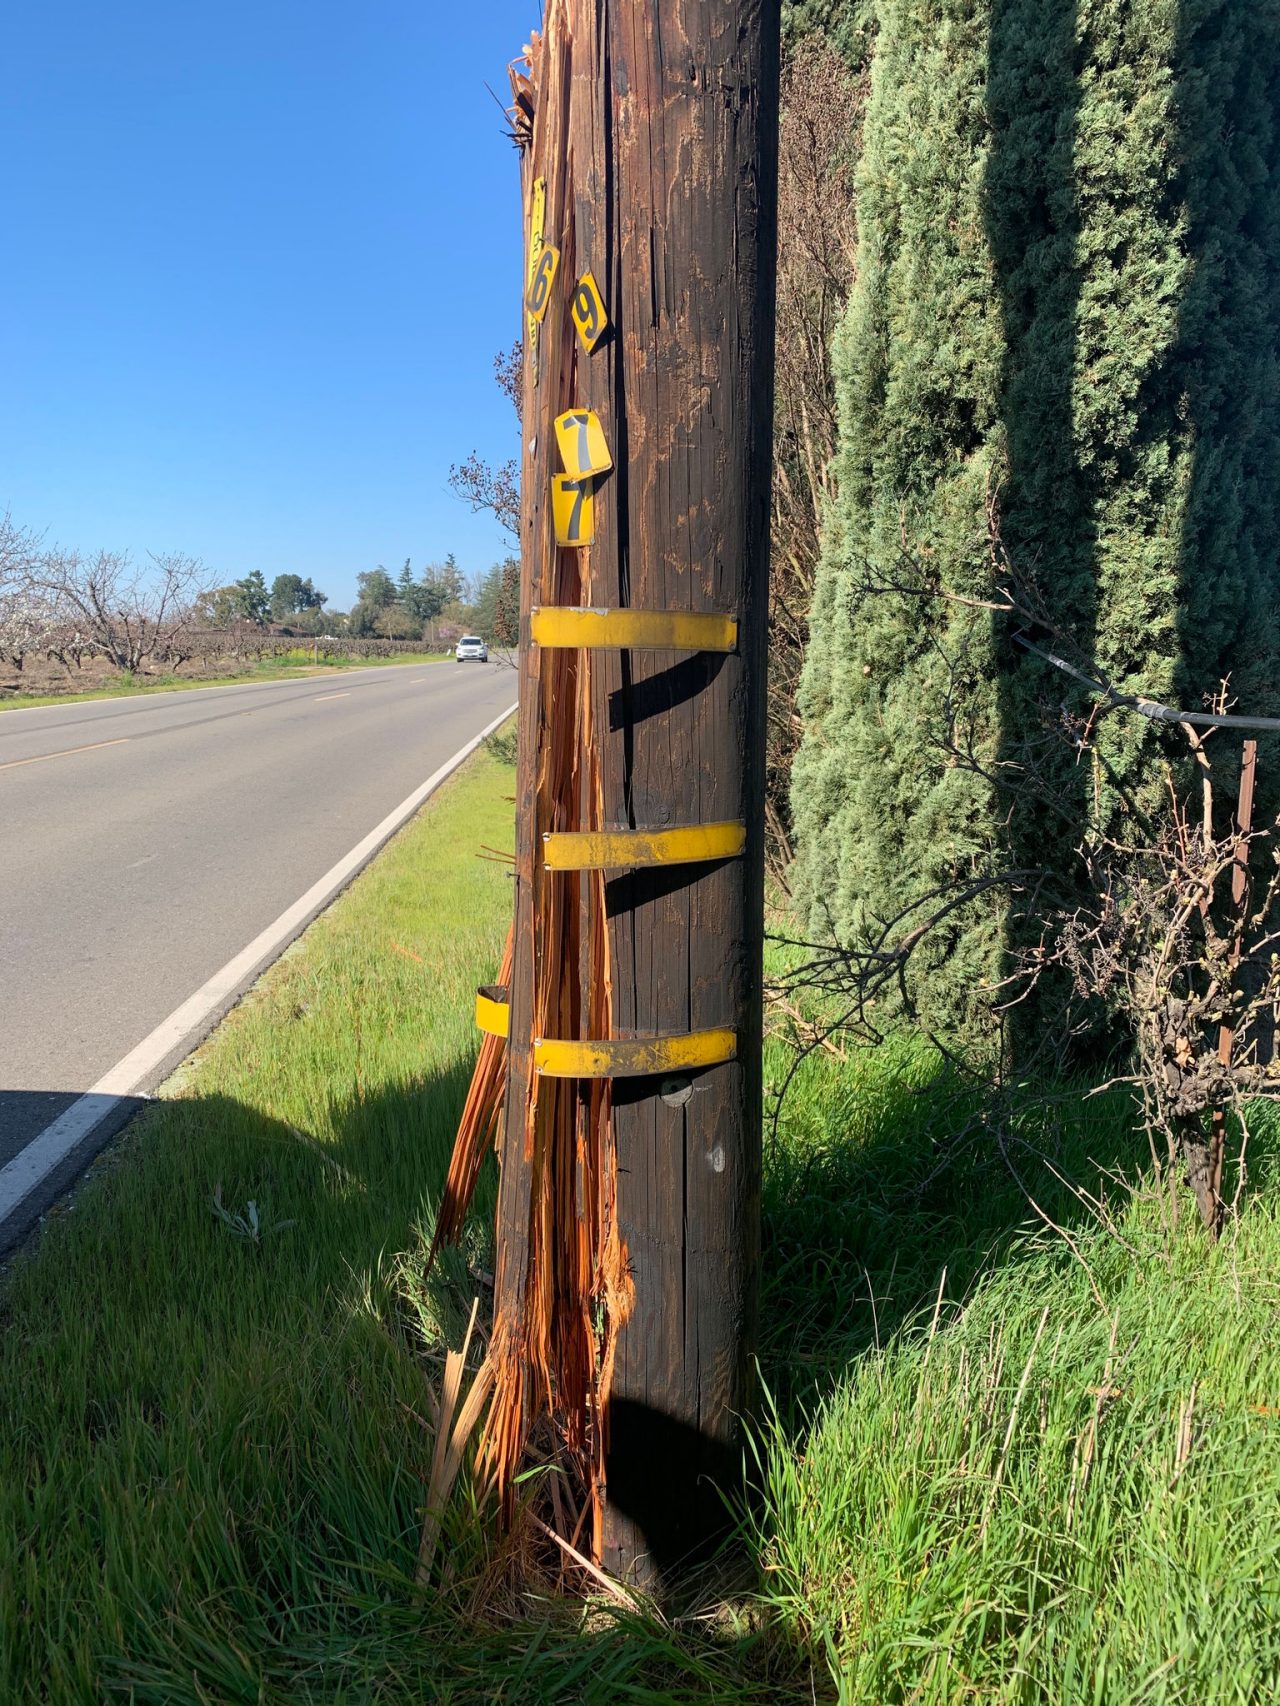 Pole that was hit by a car